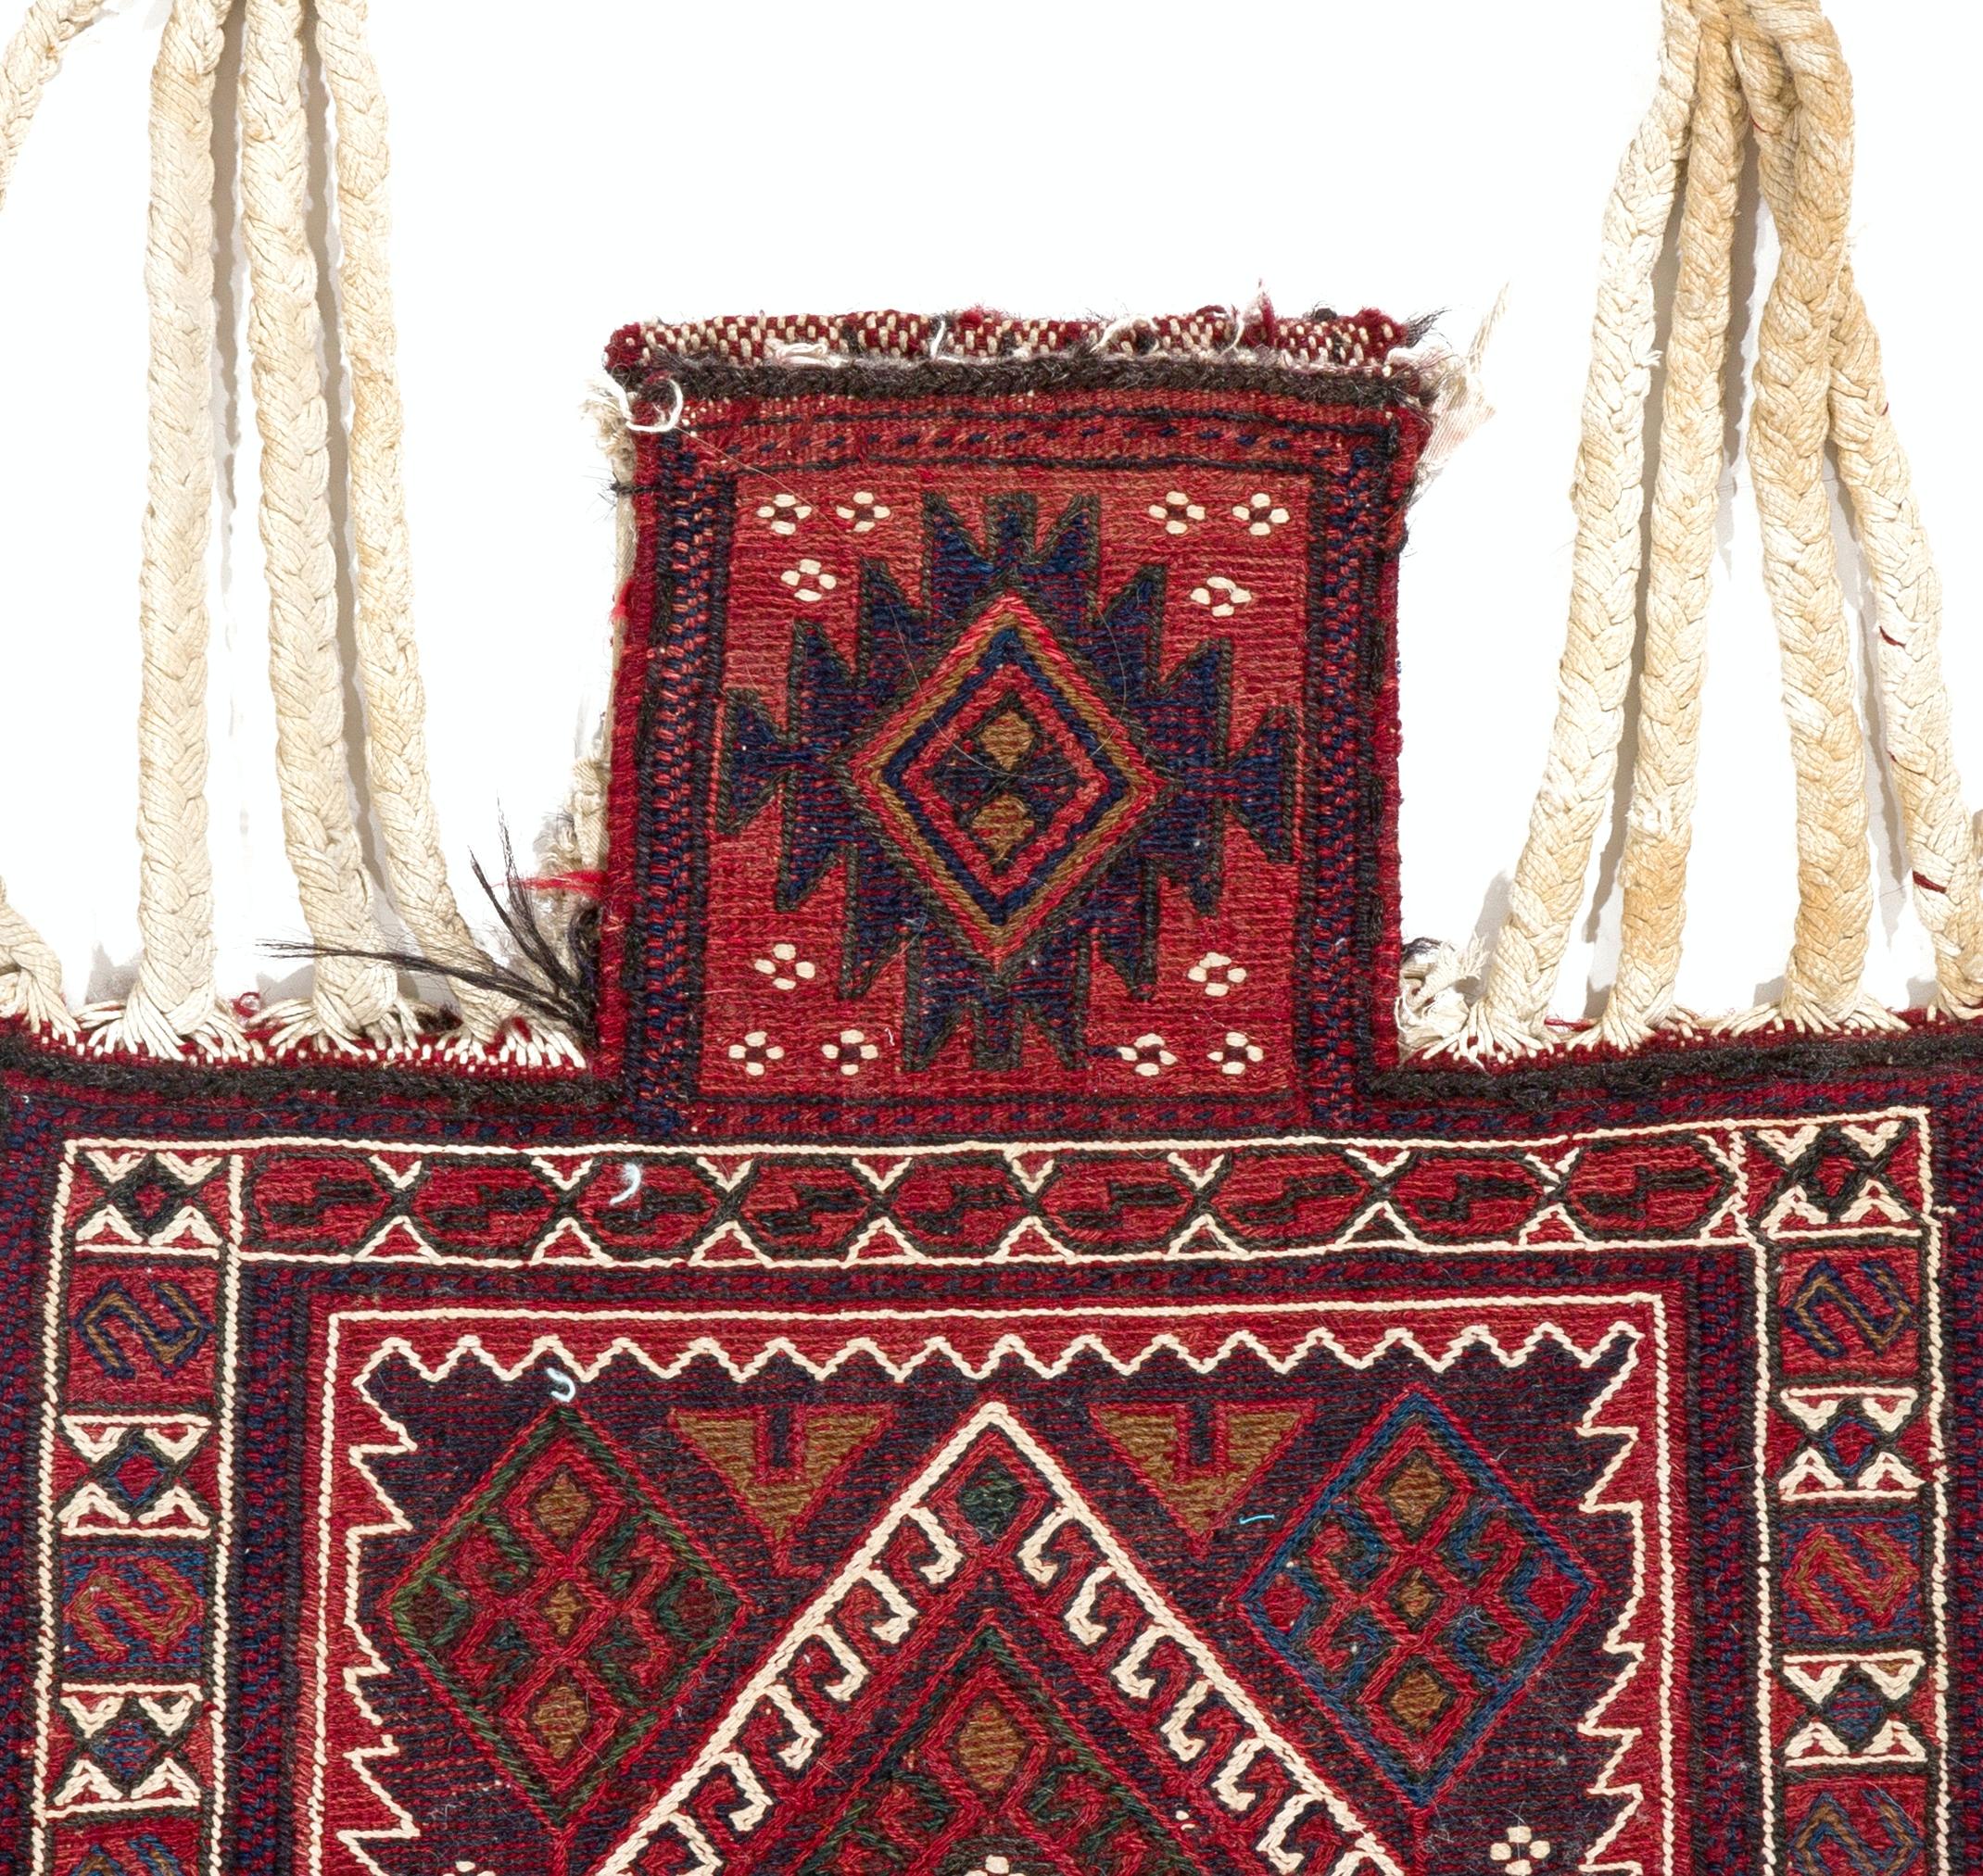 Hand-Knotted Rare Vintage Turkish Salt Bag, Decorative Handmade Wall Hanging in Red For Sale